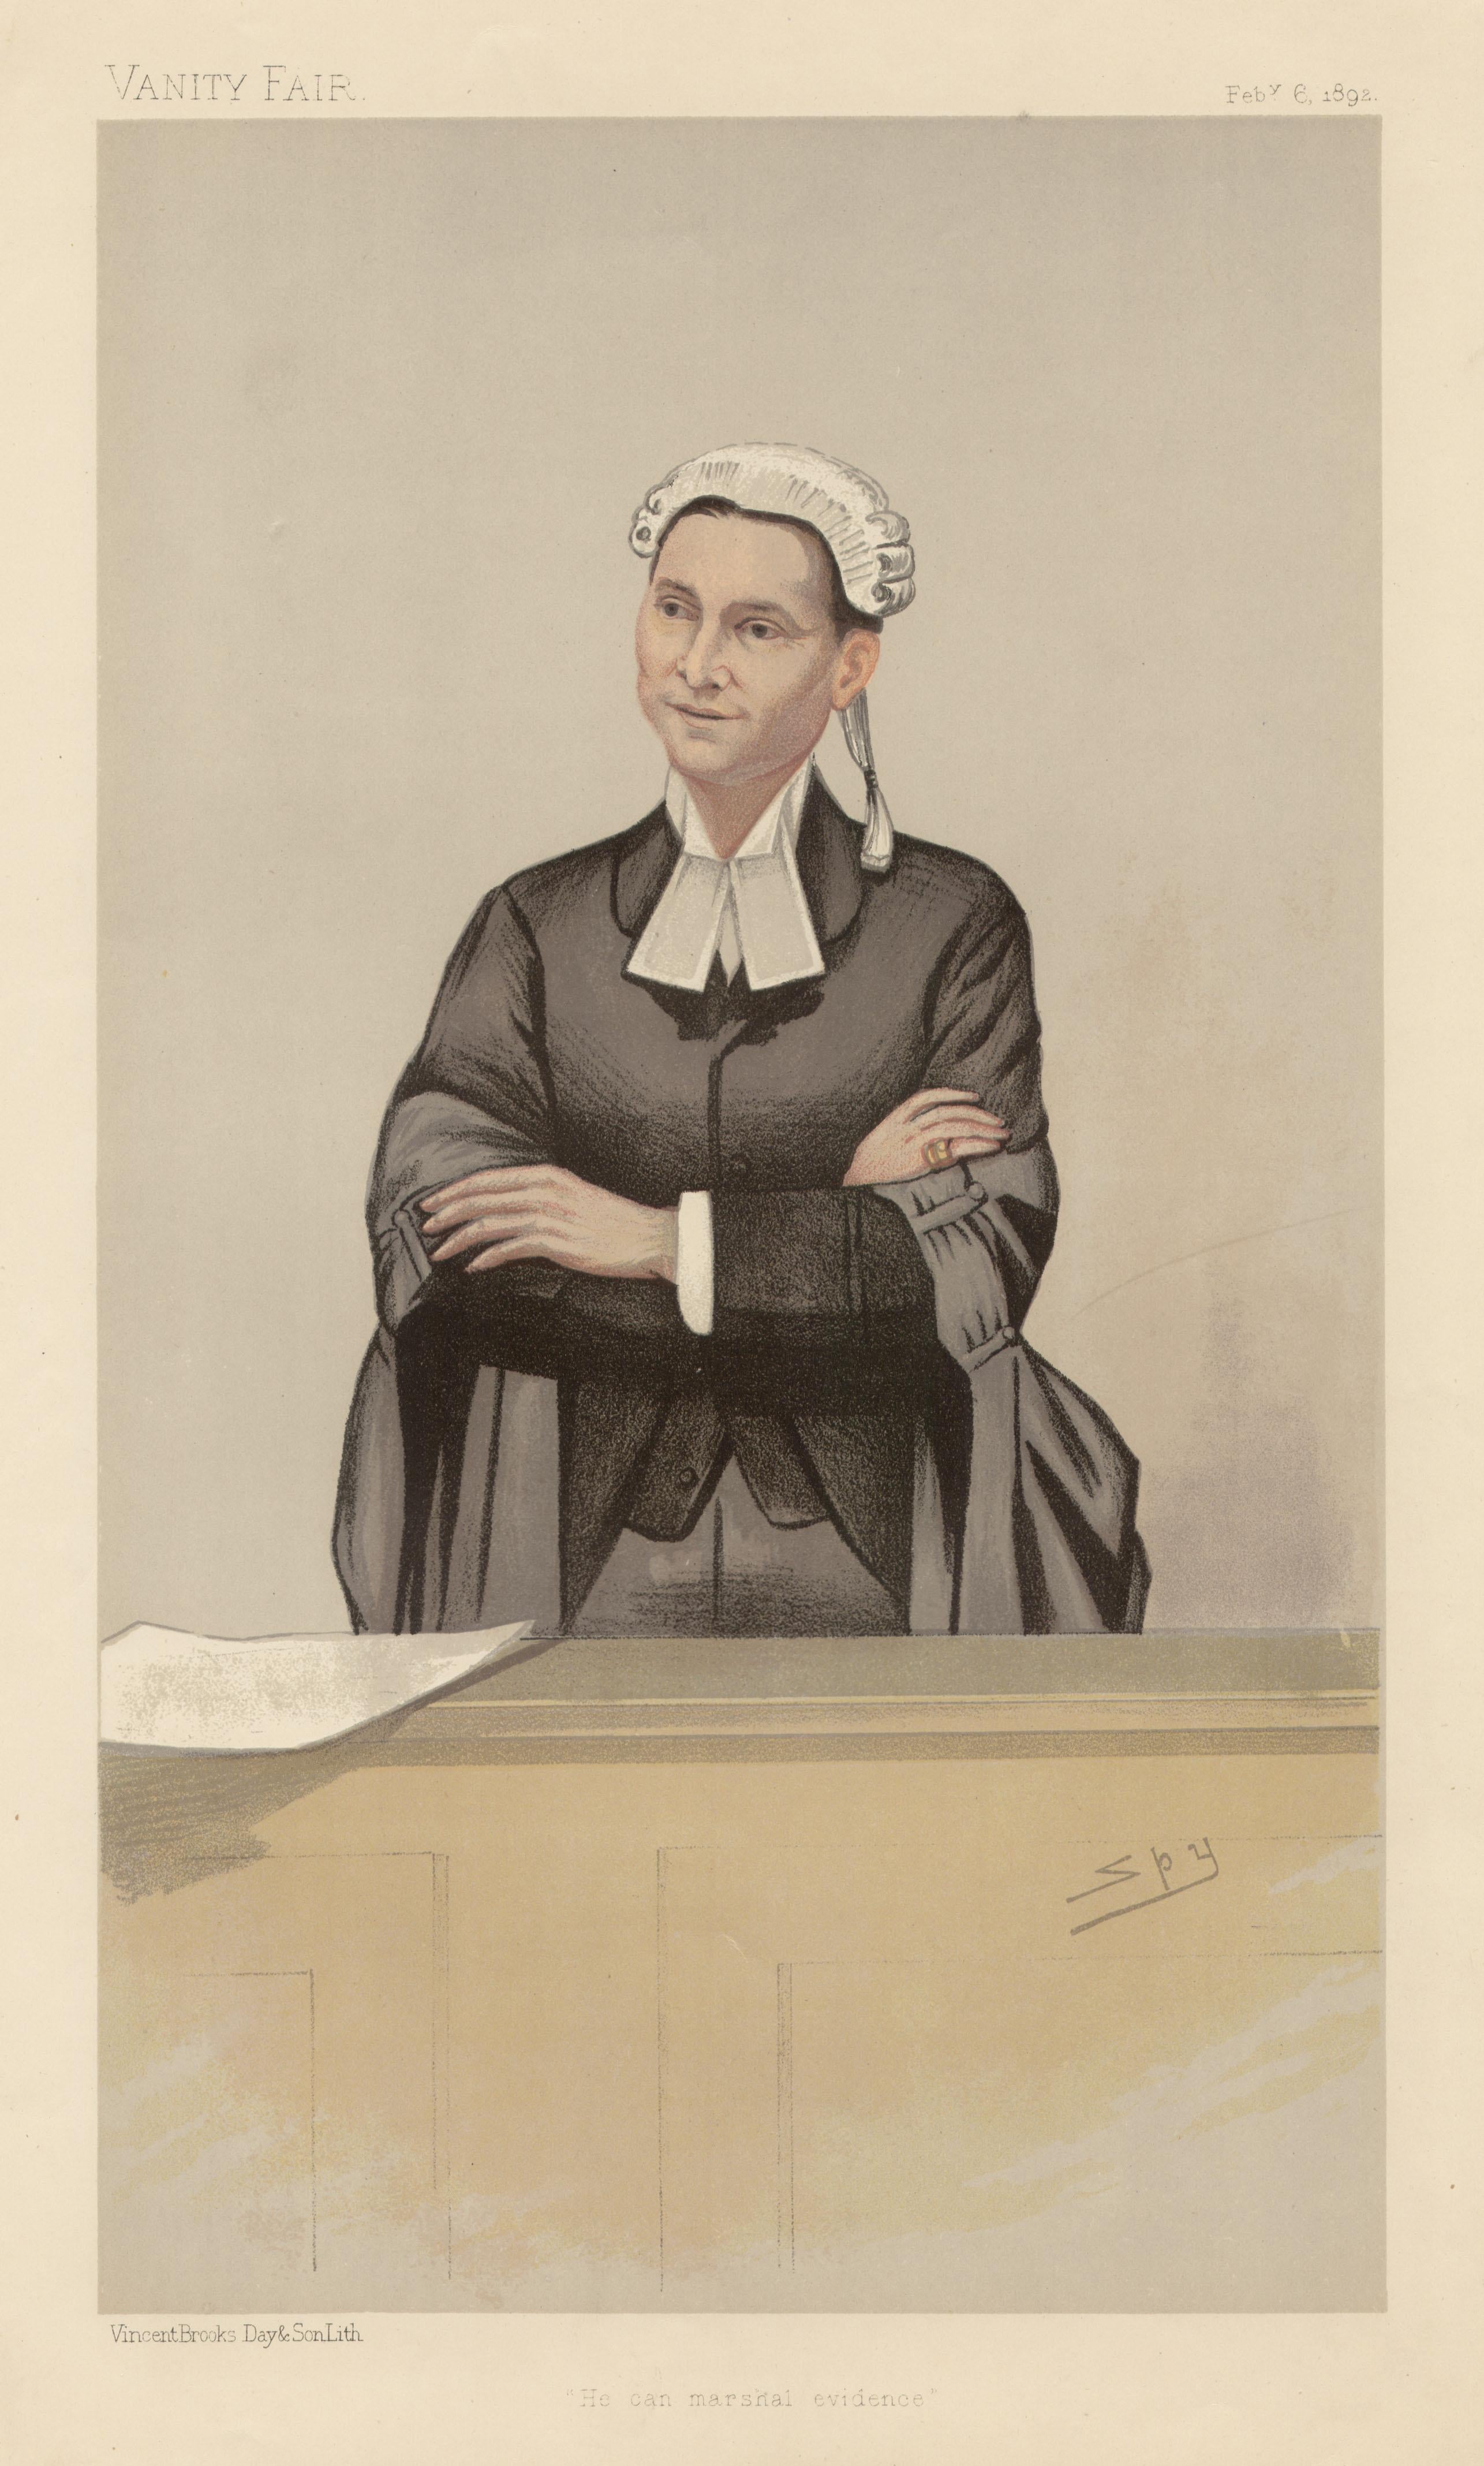 He can marshal evidence, Vanity Fair legal chromolithograph of a judge, 1892